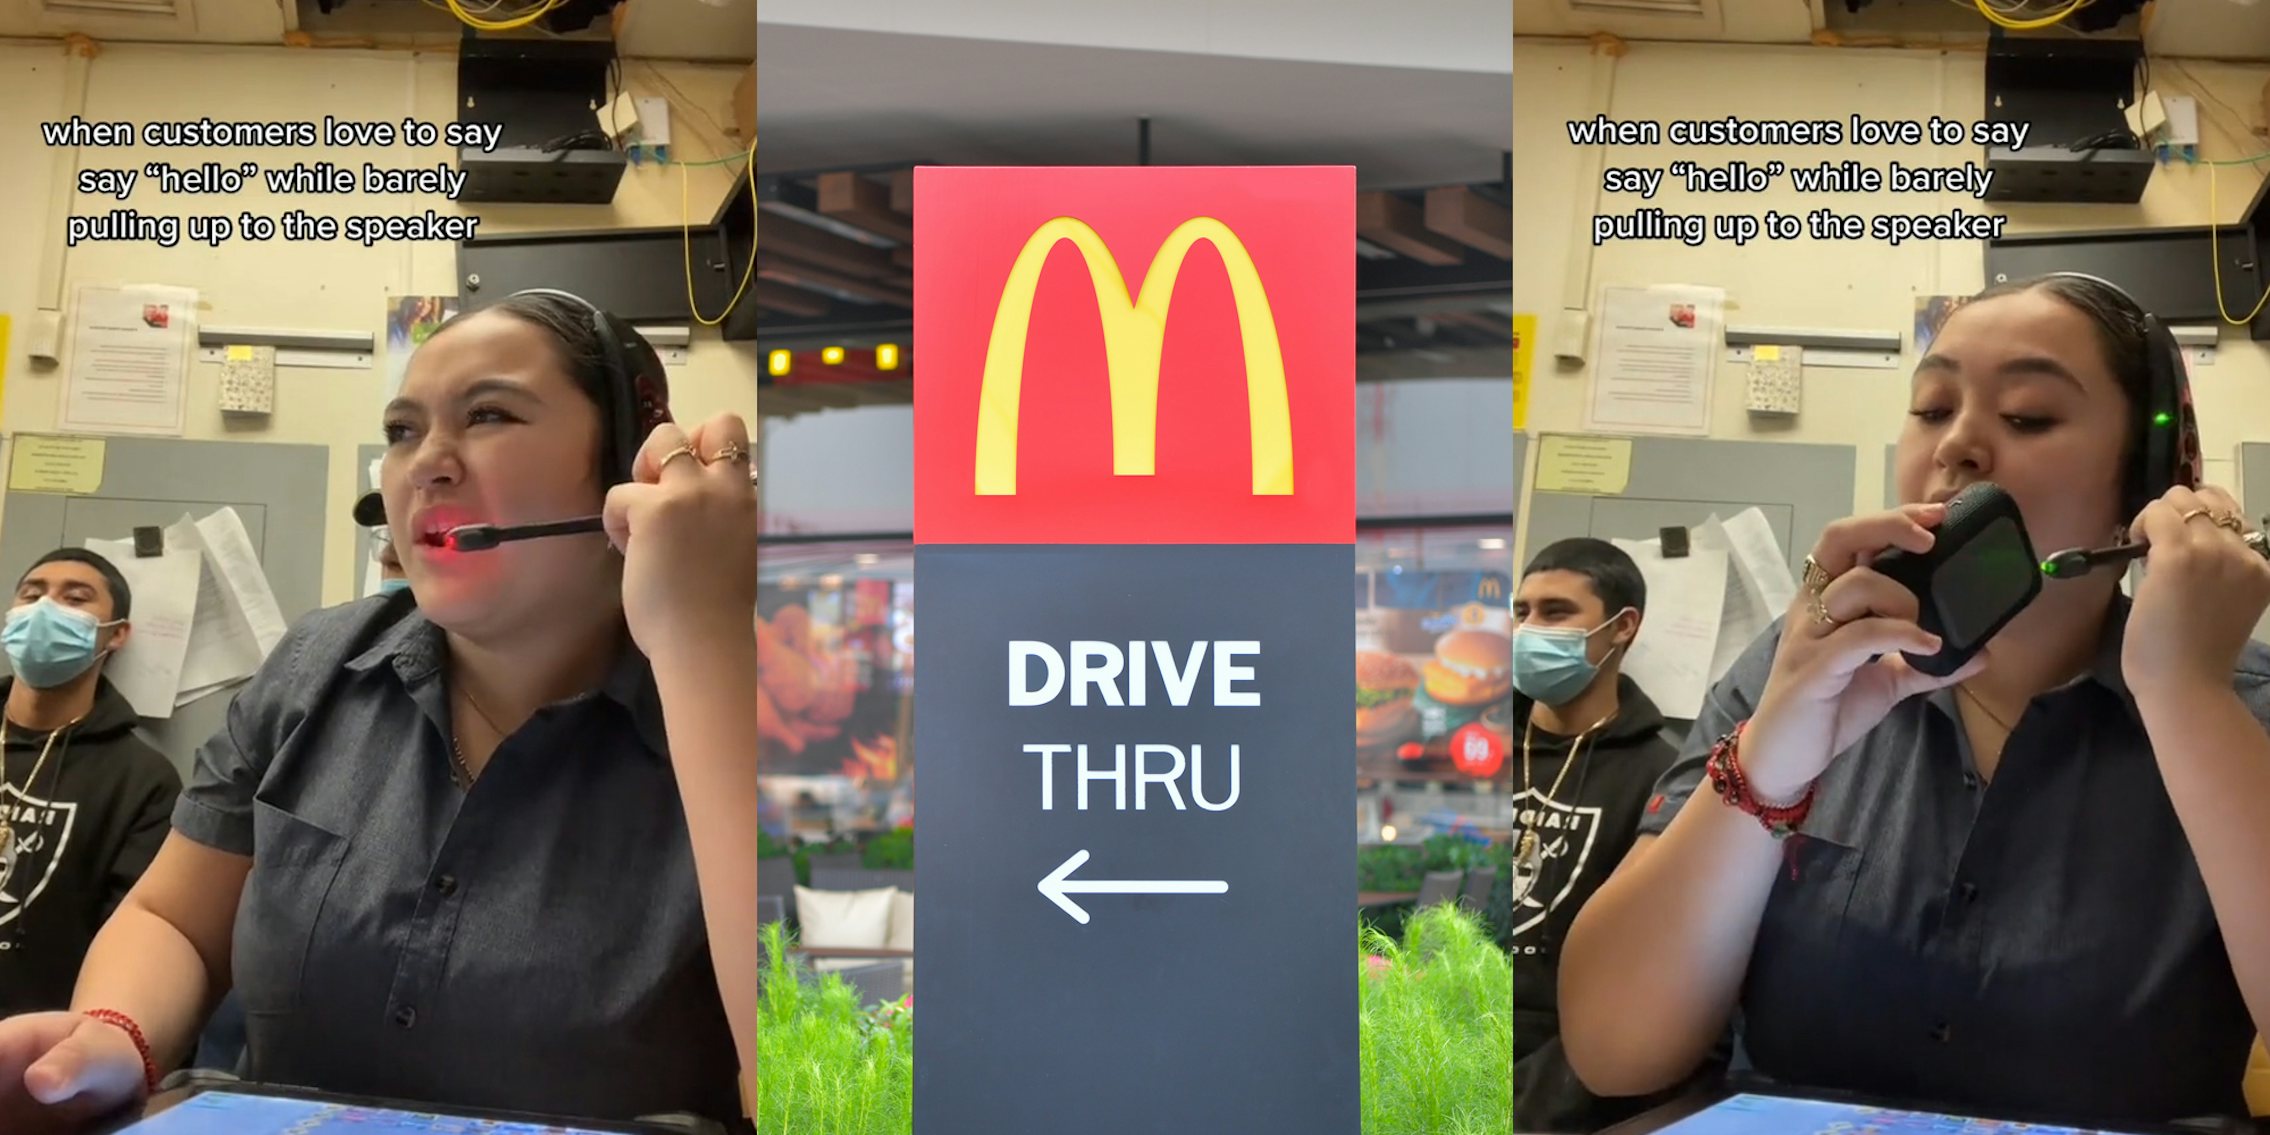 McDonald's worker speaking with headset on with caption 'when customers love to say 'hello' while barely pulling up to the speaker' (l) McDonald's drive thru sign in front of building (c) McDonald's worker speaking with headset on and speaker up to microphone with caption 'when customers love to say 'hello' while barely pulling up to the speaker' (r)